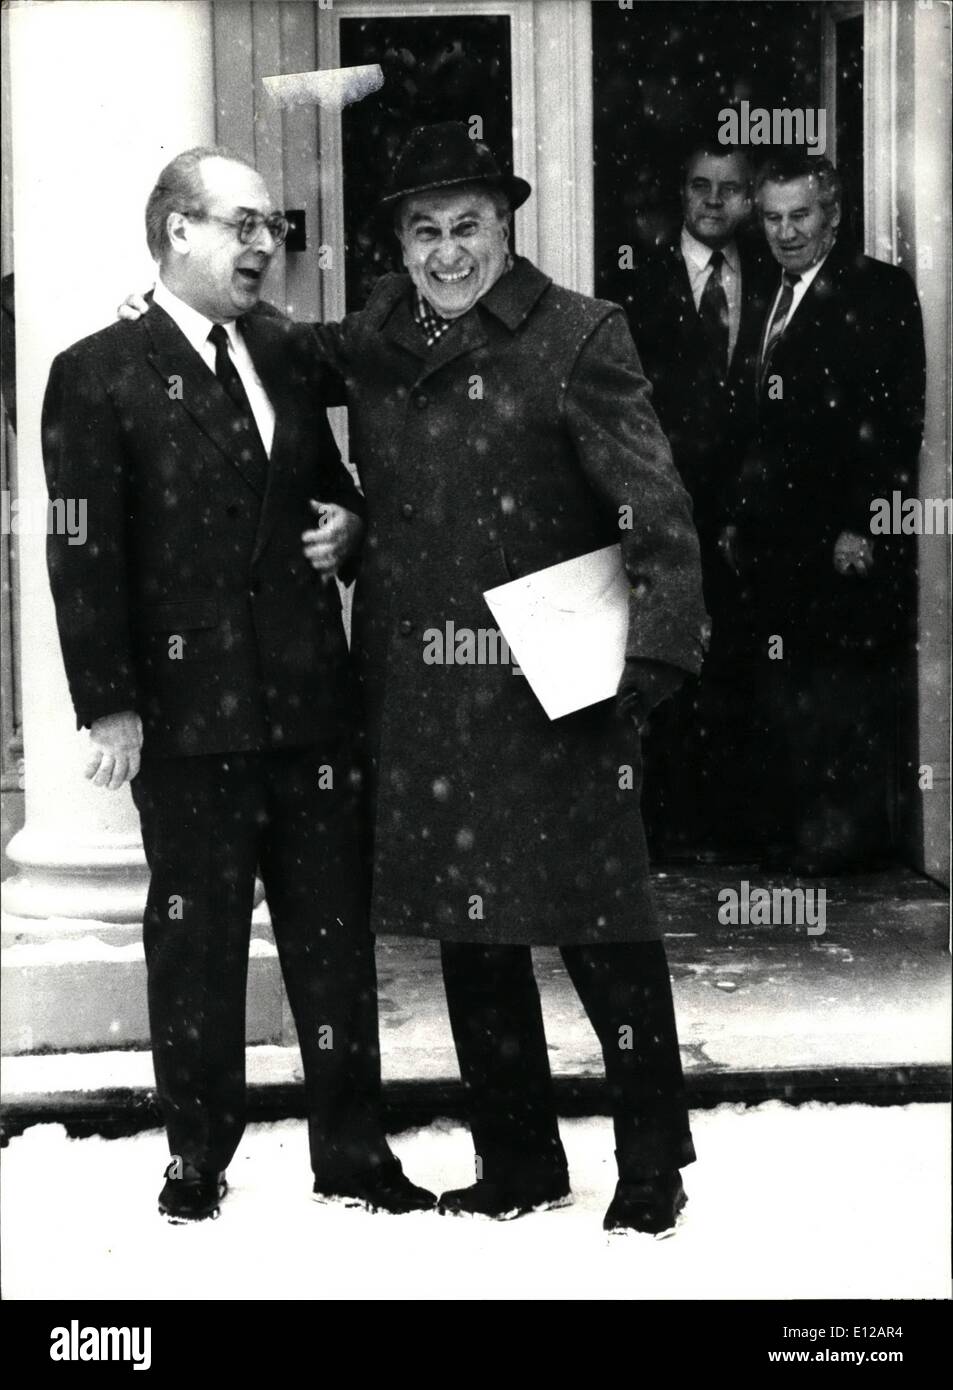 Dec. 09, 2011 - A new face in Geneva. As arms talks in Geneva go into their 7th round, the Soviet delegation broke the routine by announcing their new chief delegate Yuri Voronzov (L) who succeeded Victor Karpov. He was greeted by US counterpart Max Kampelman before they withdraw for preliminary discussions. January 1987 Stock Photo